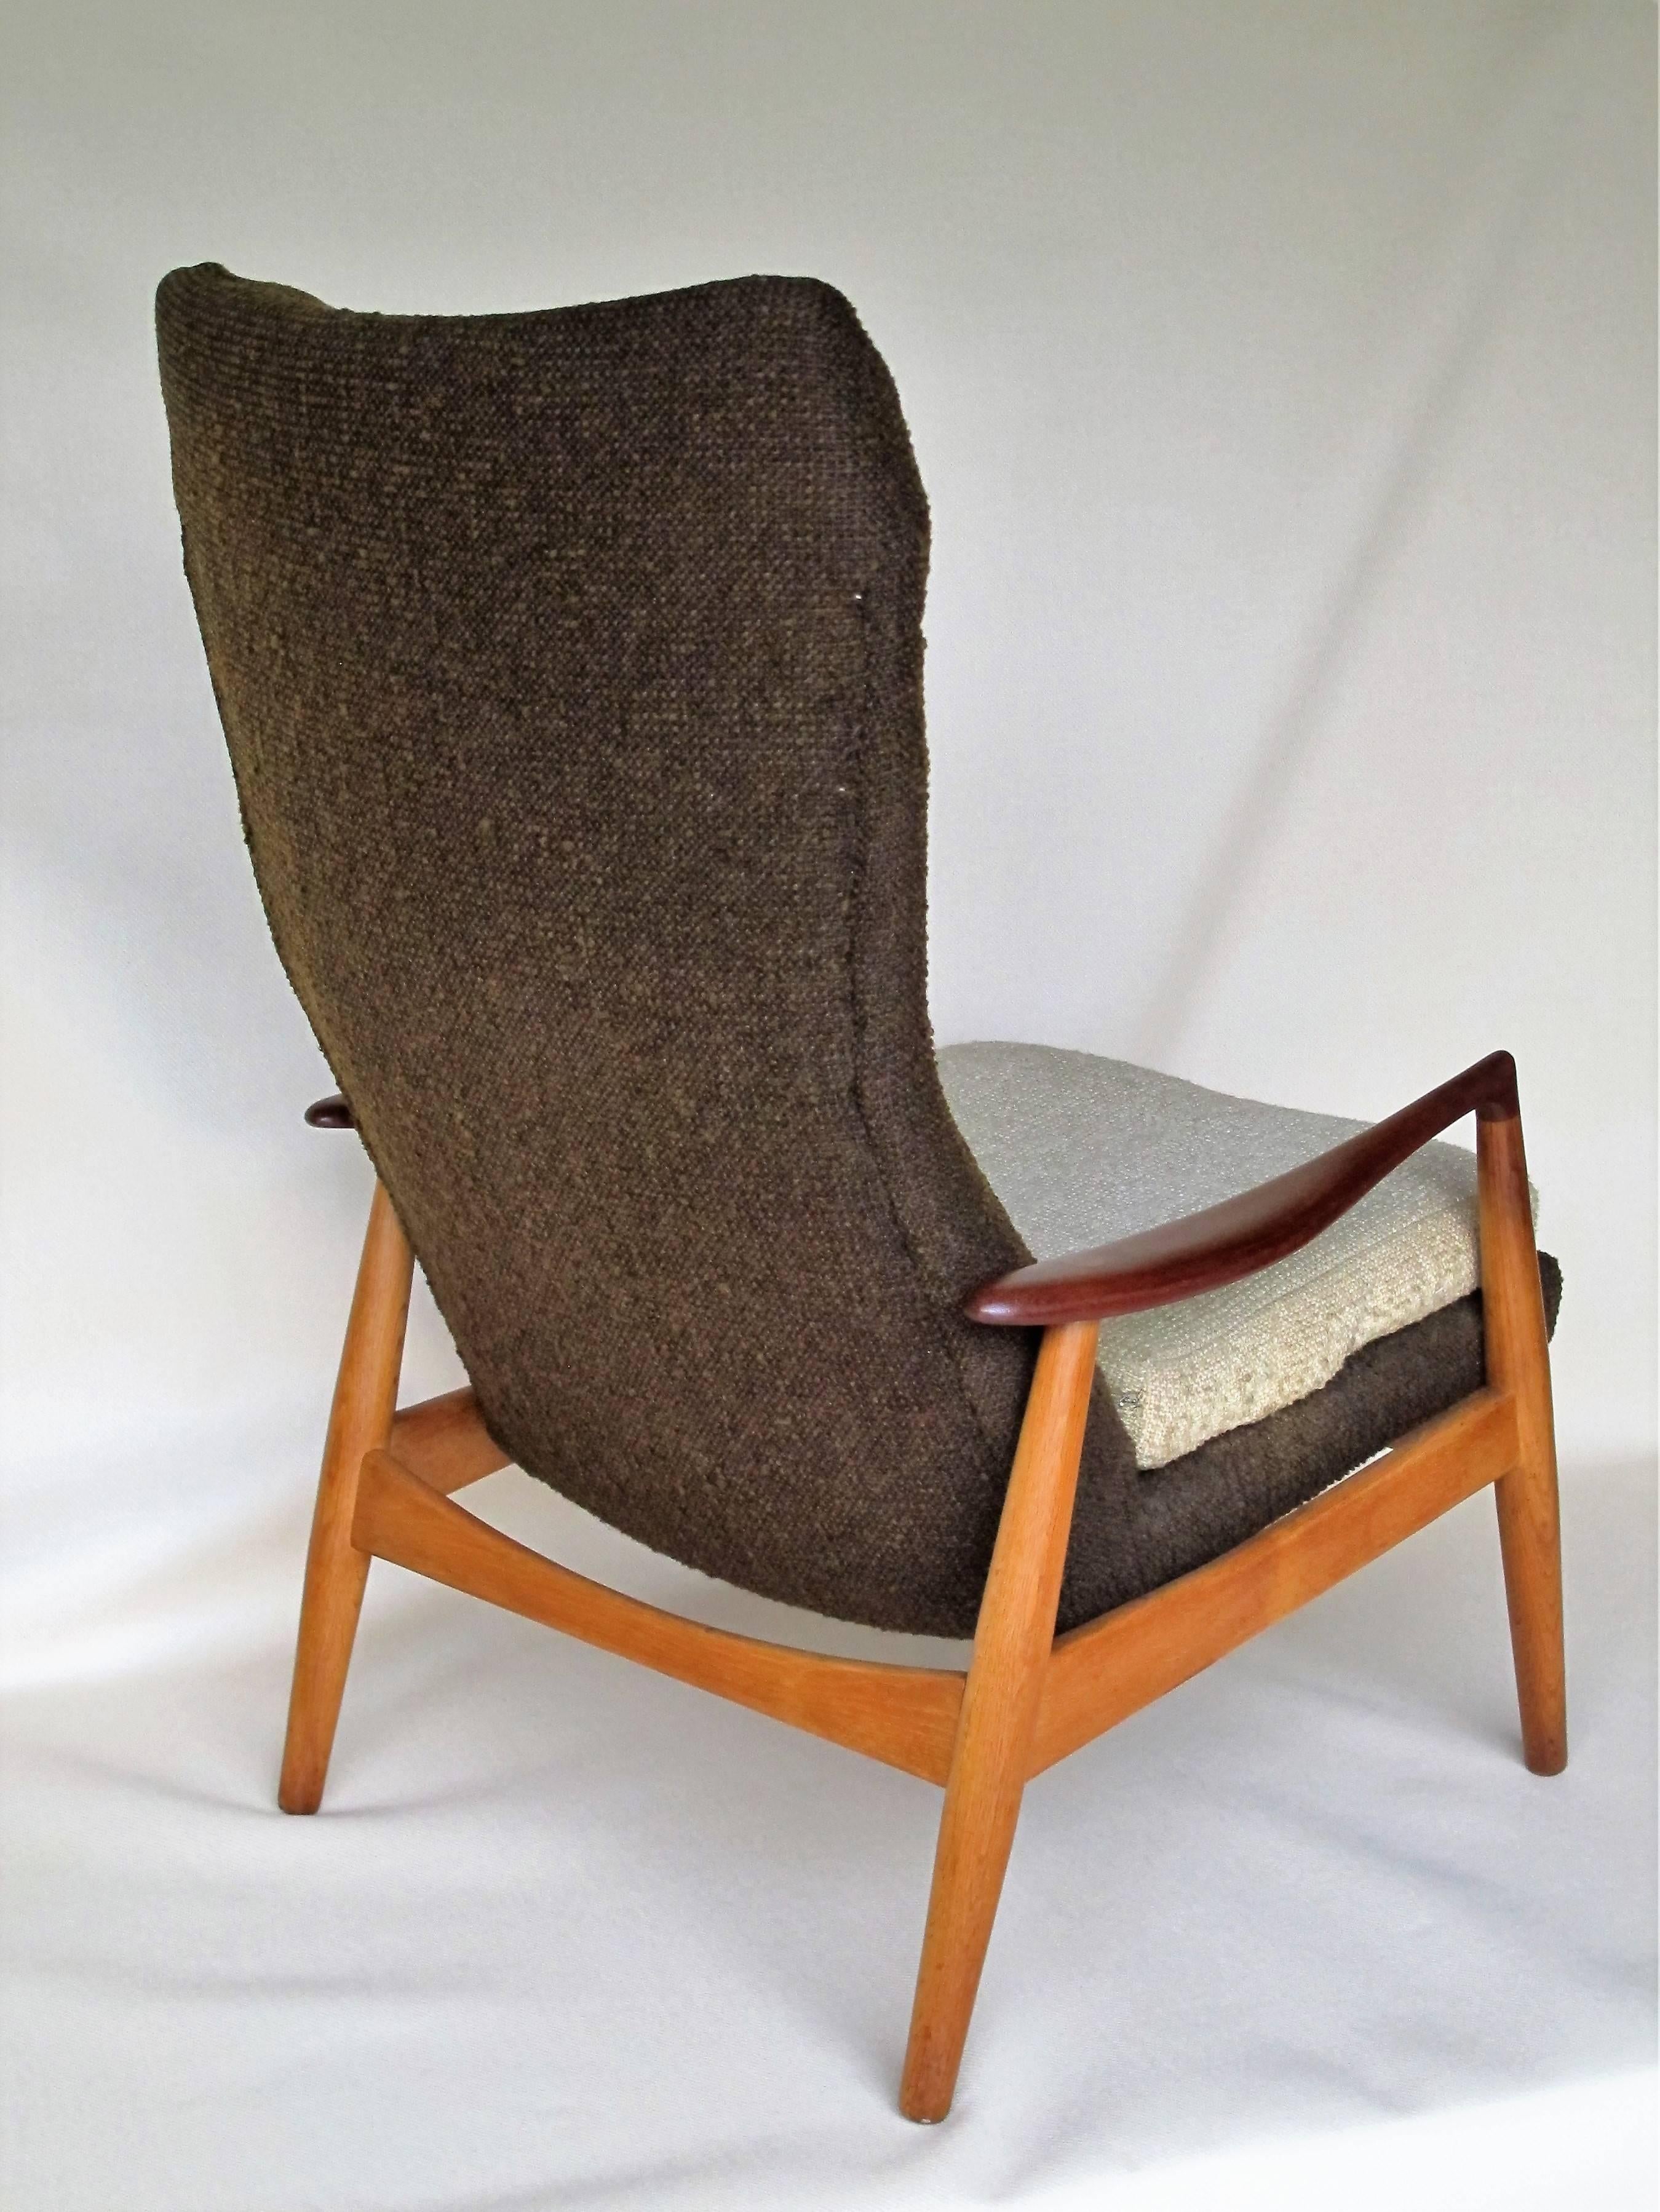 Beautiful lounge chair designed by Aksel Bender Madsen for the Dutch manufacturer Bovenkamp. Elegant 1960s modern design.

In good vintage condition with original upholstery.